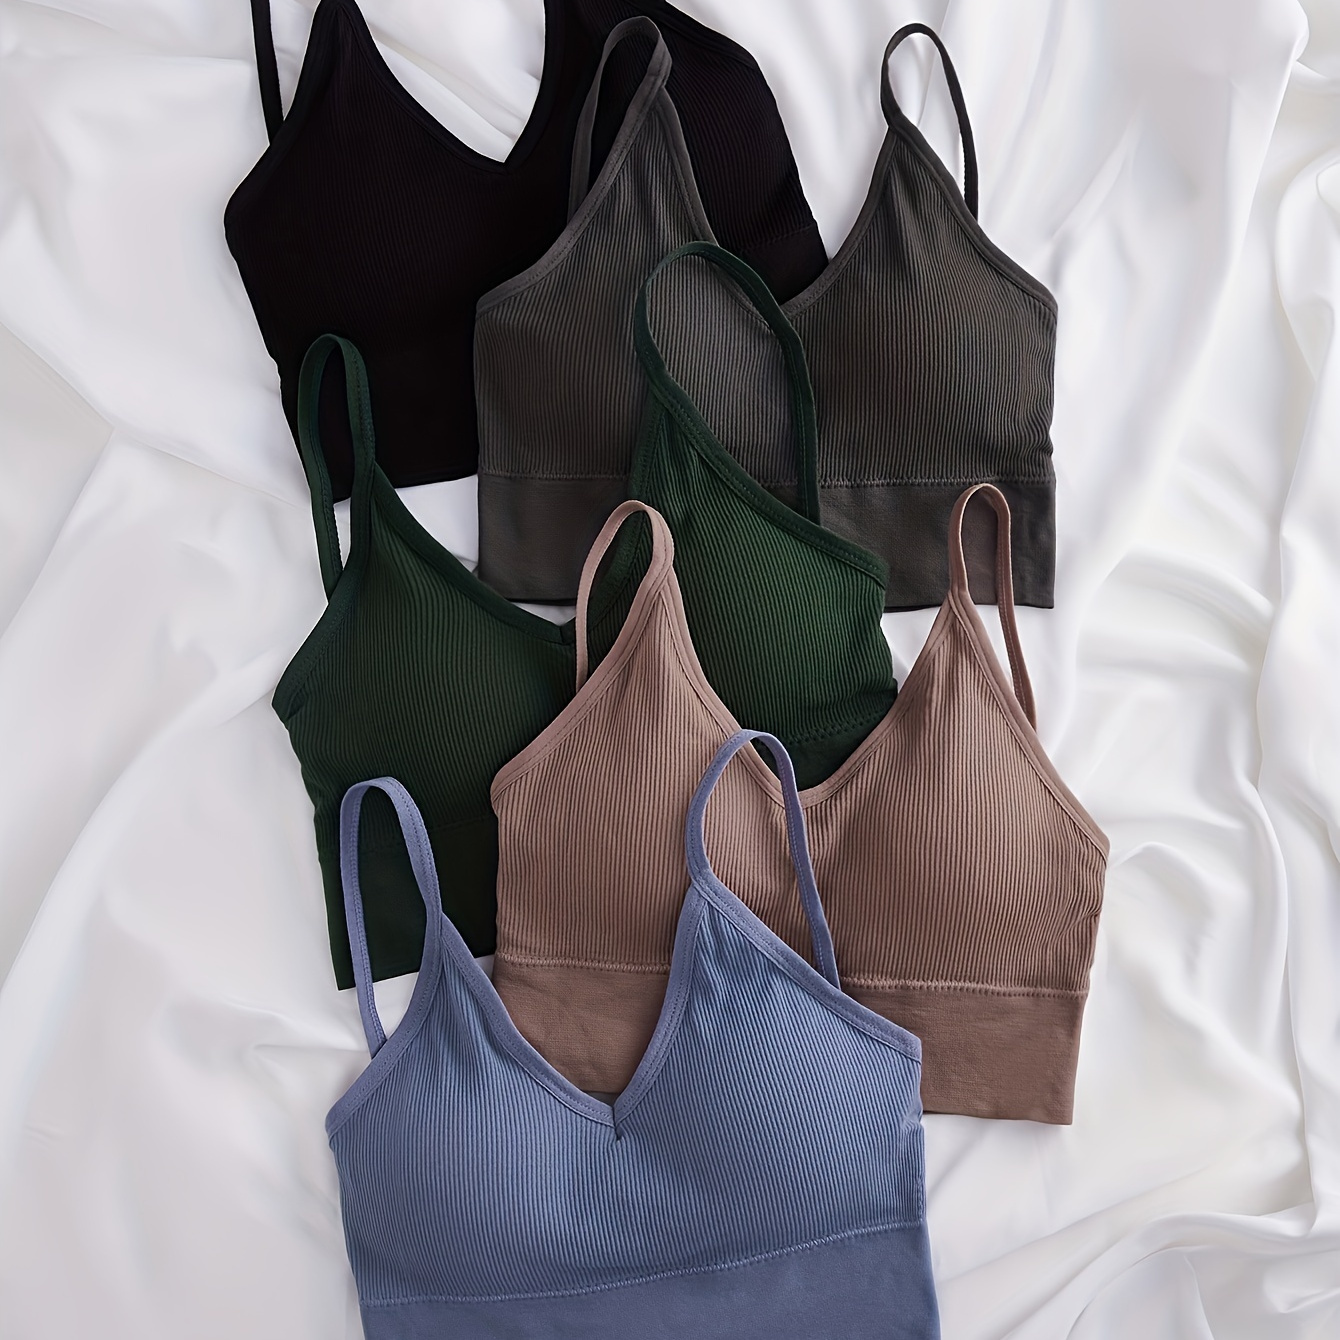 

5-pack Women's Sports Bra With Stylish Cross-back Design, Casual Style, Assorted Colors Comfort Fit For Leisure Activities